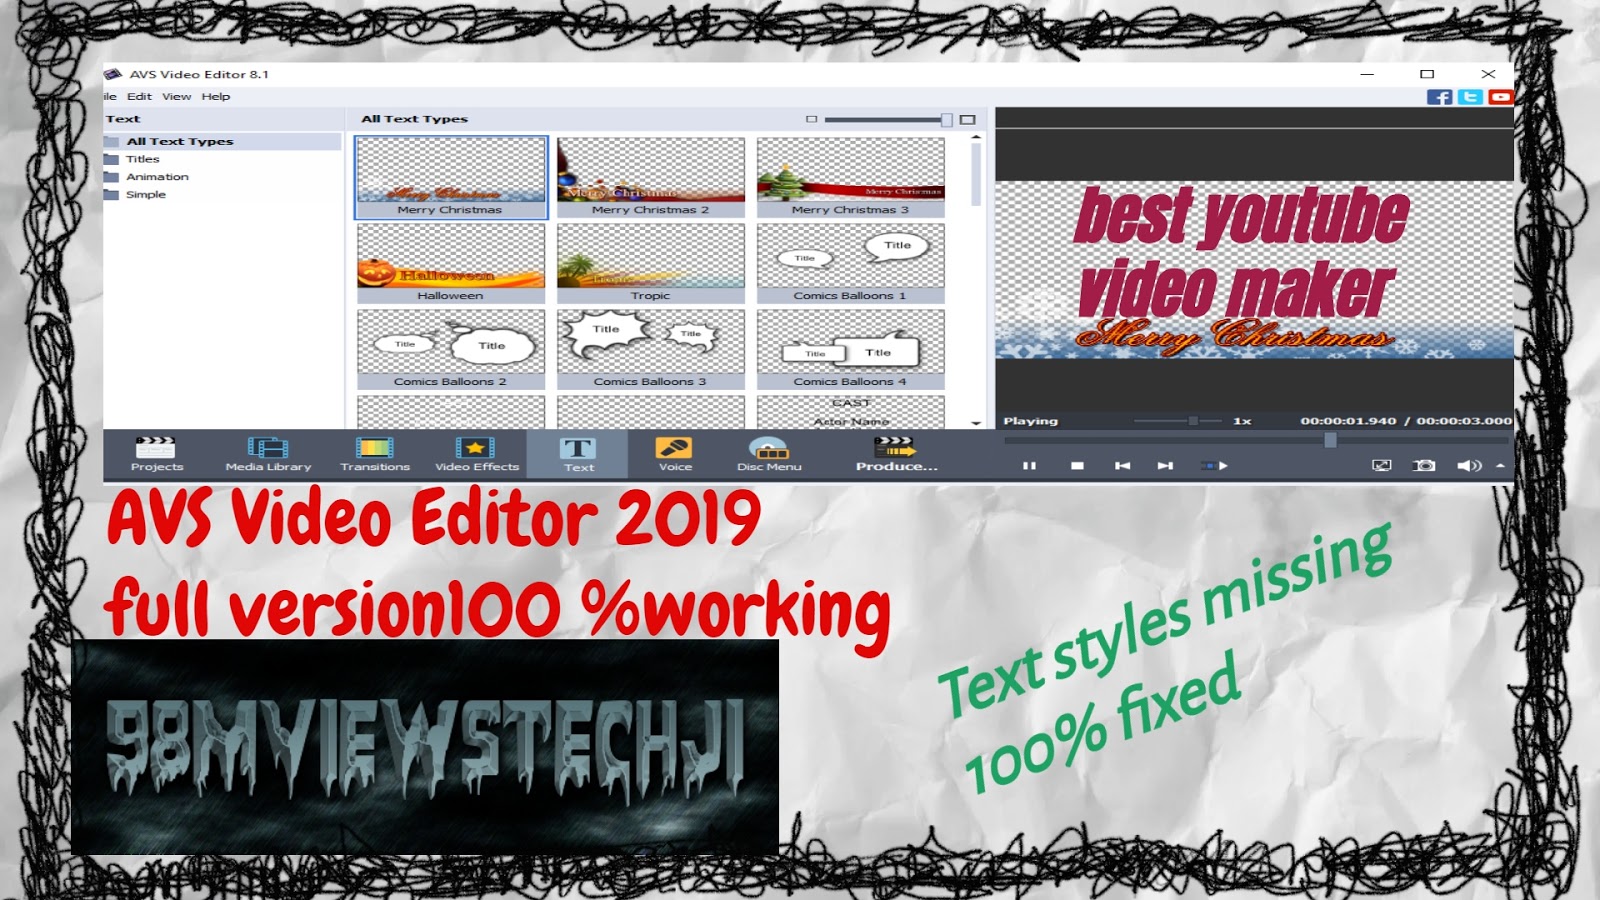 AVS Video Editor 2019 full version 100 working no text